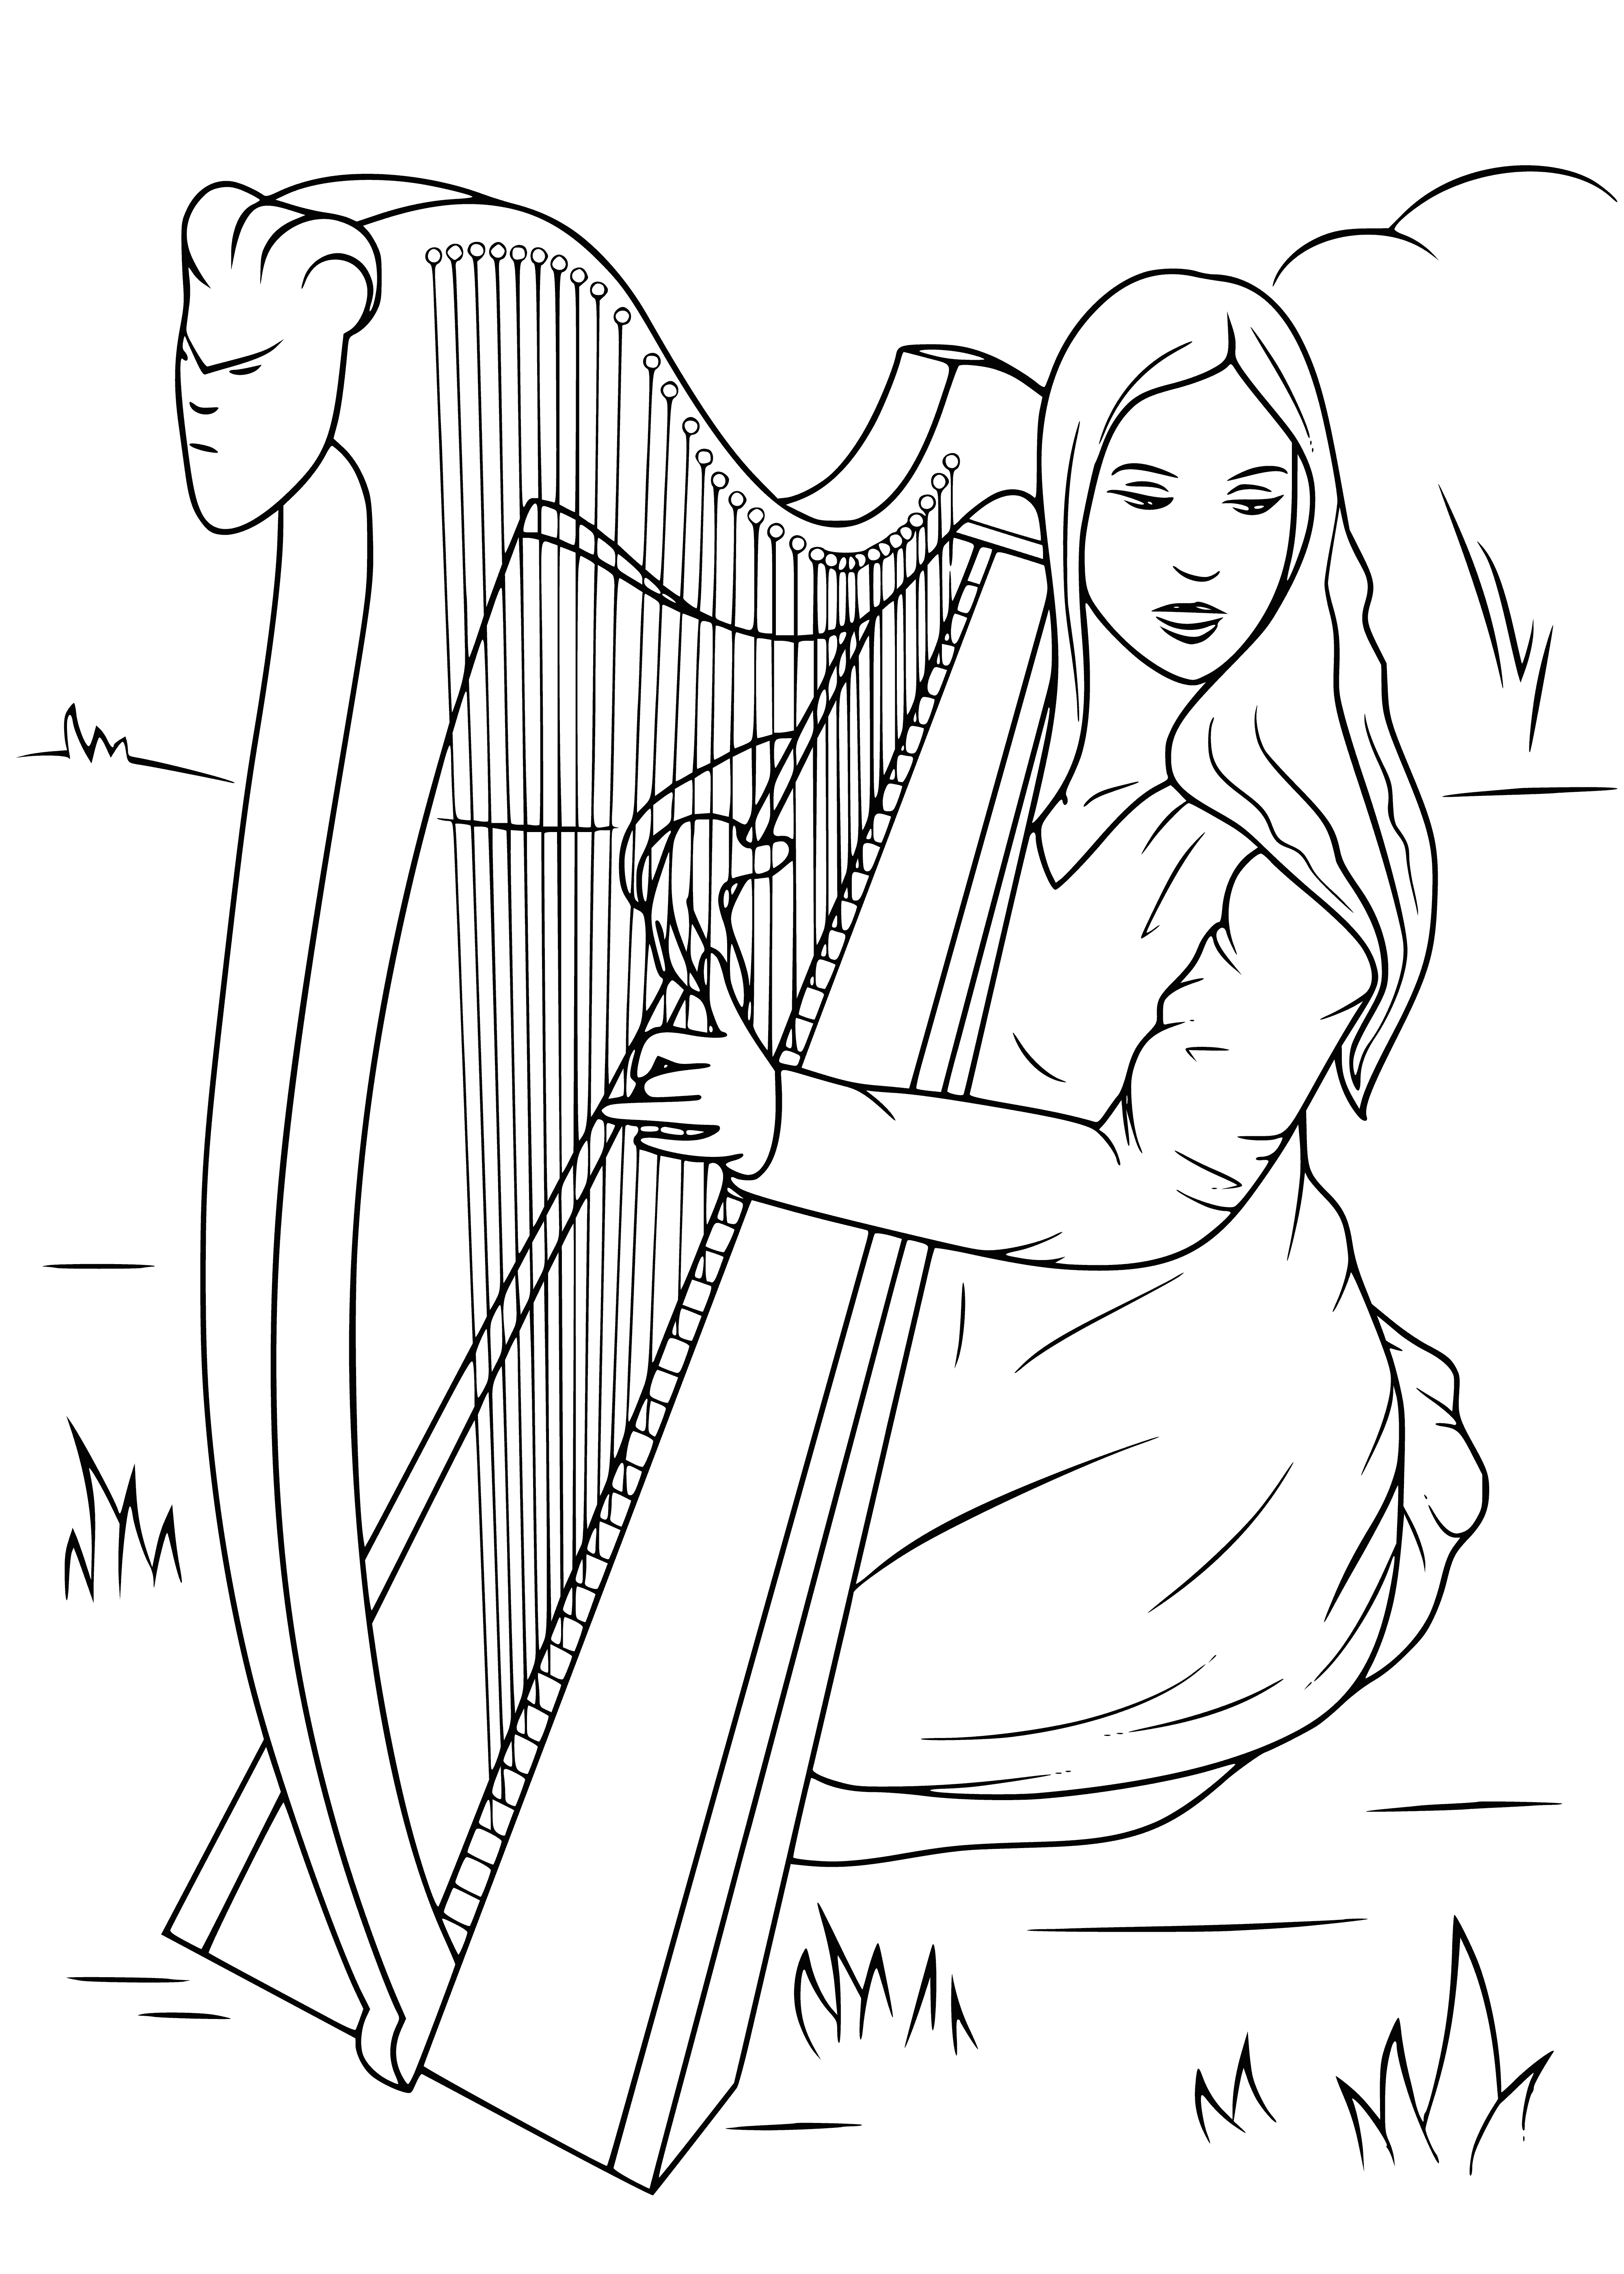 Harp playing coloring page